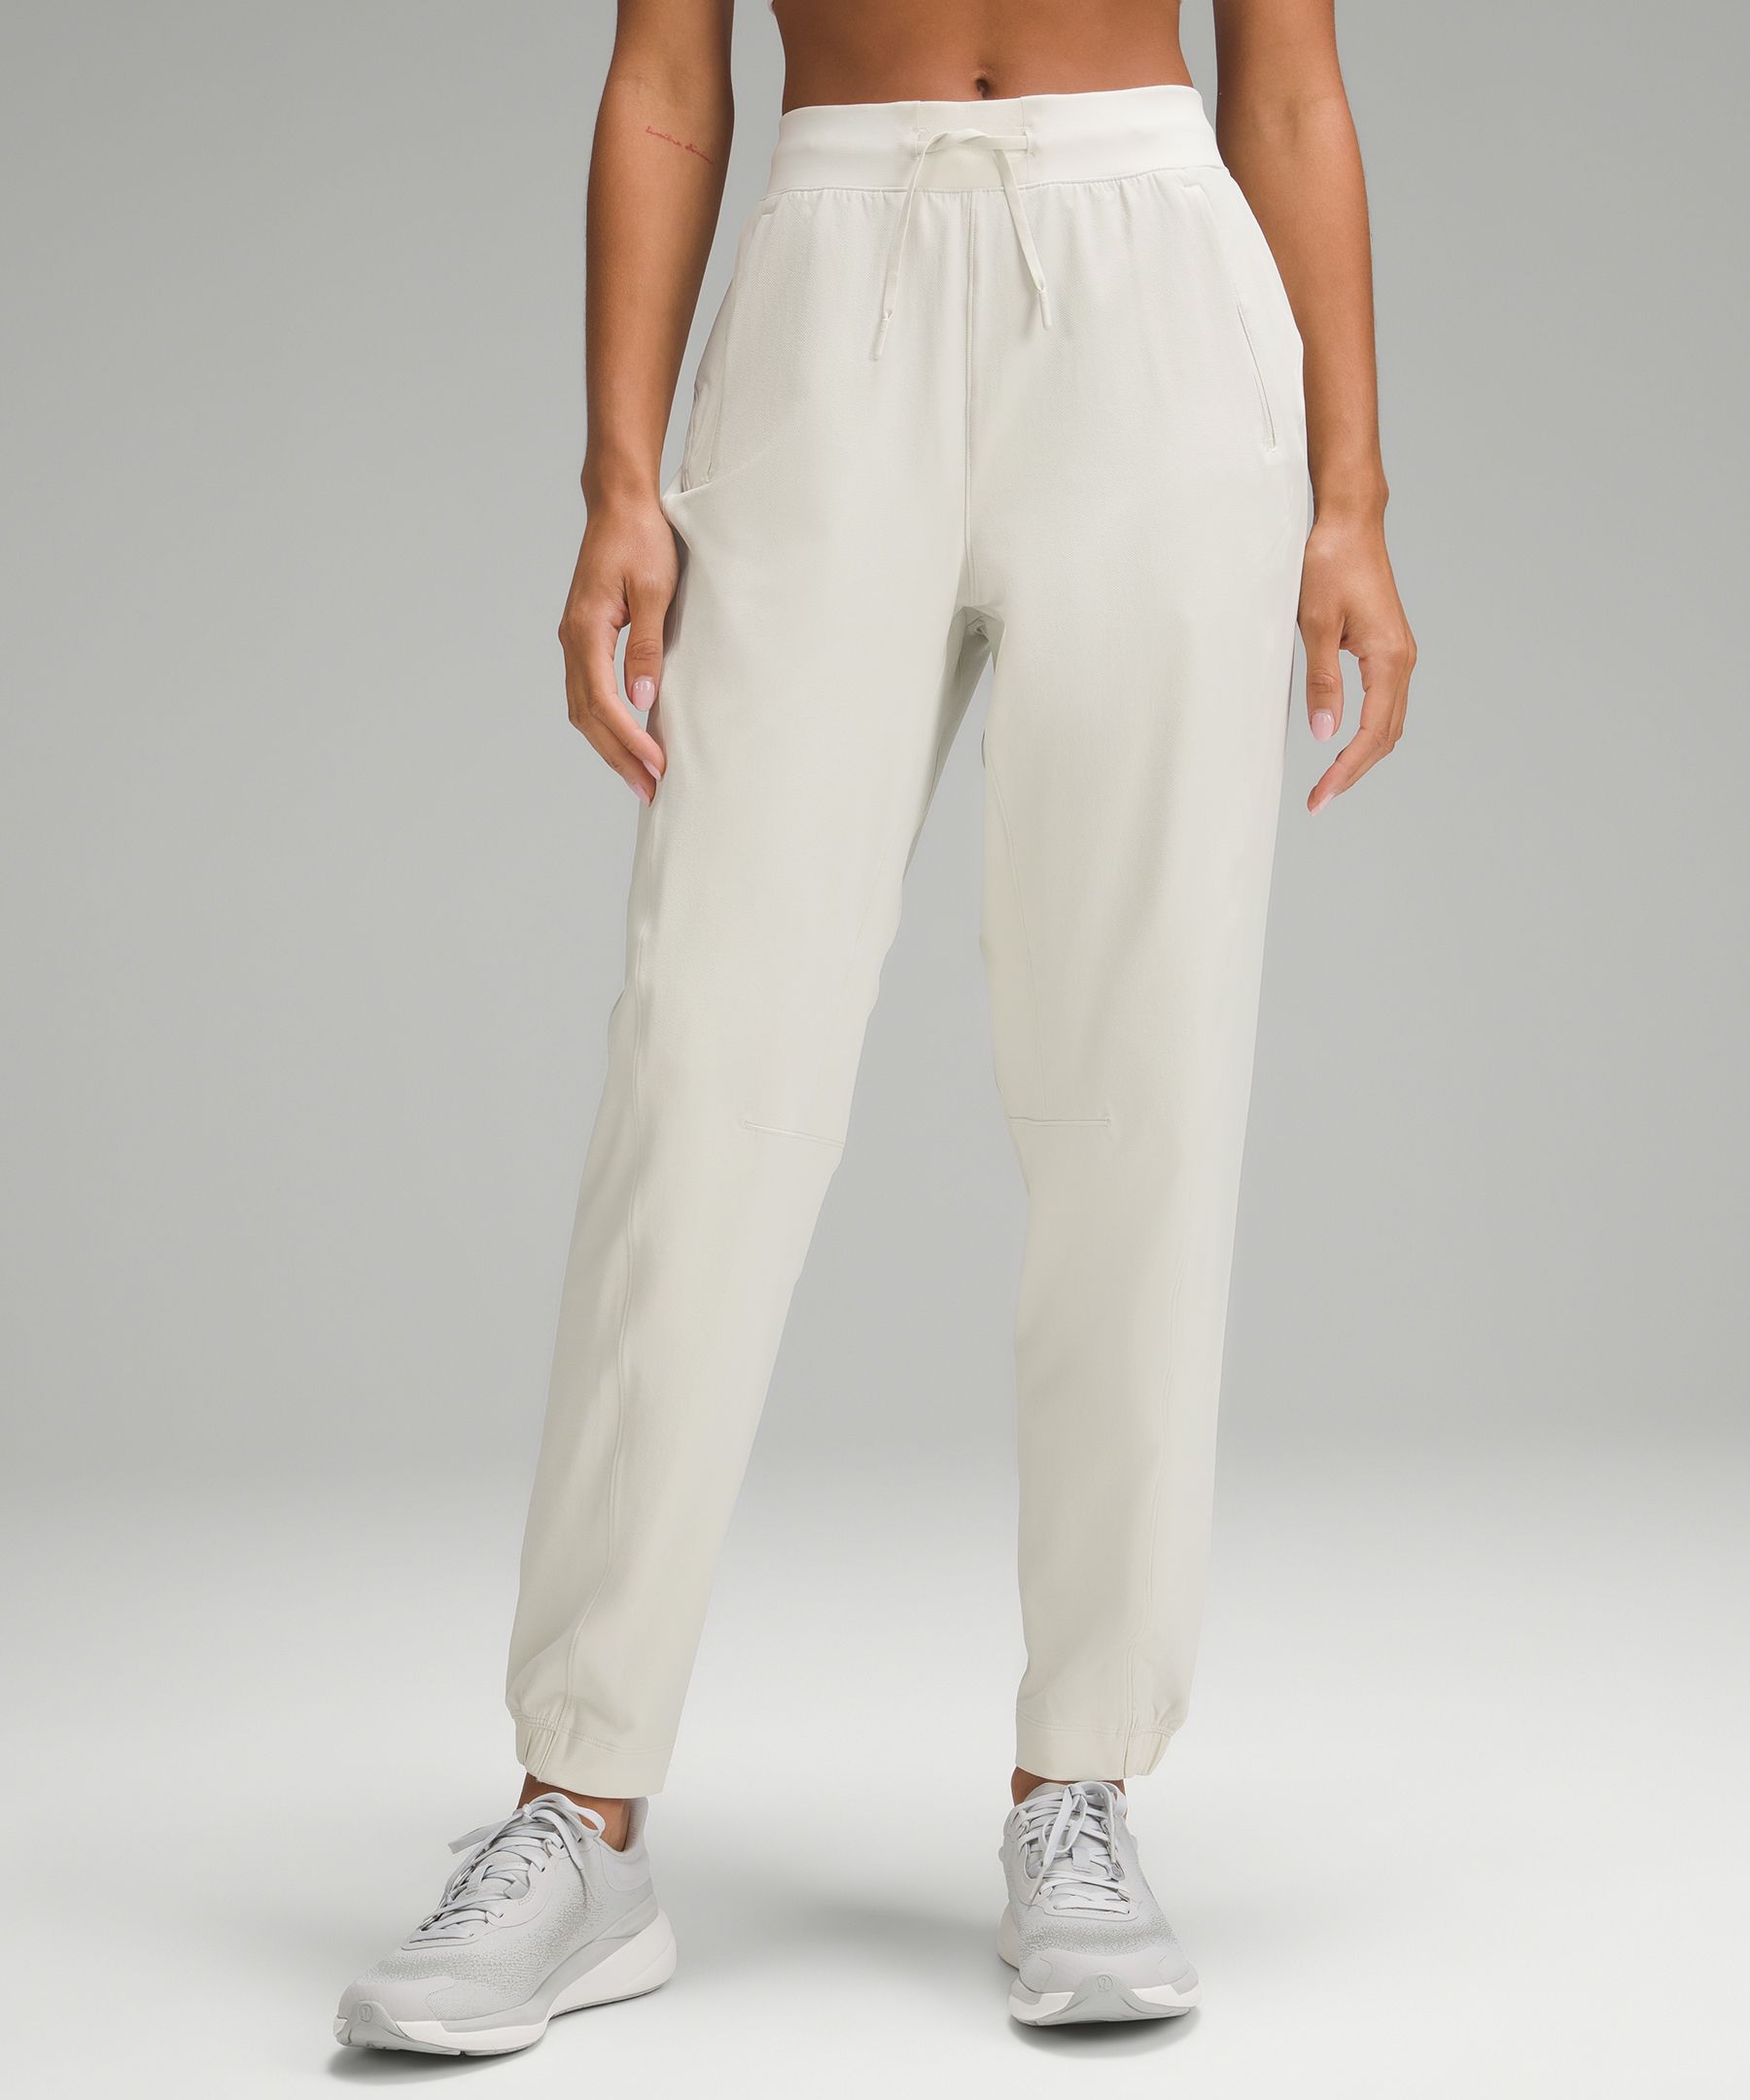 License to Train High-Rise Pant, Joggers